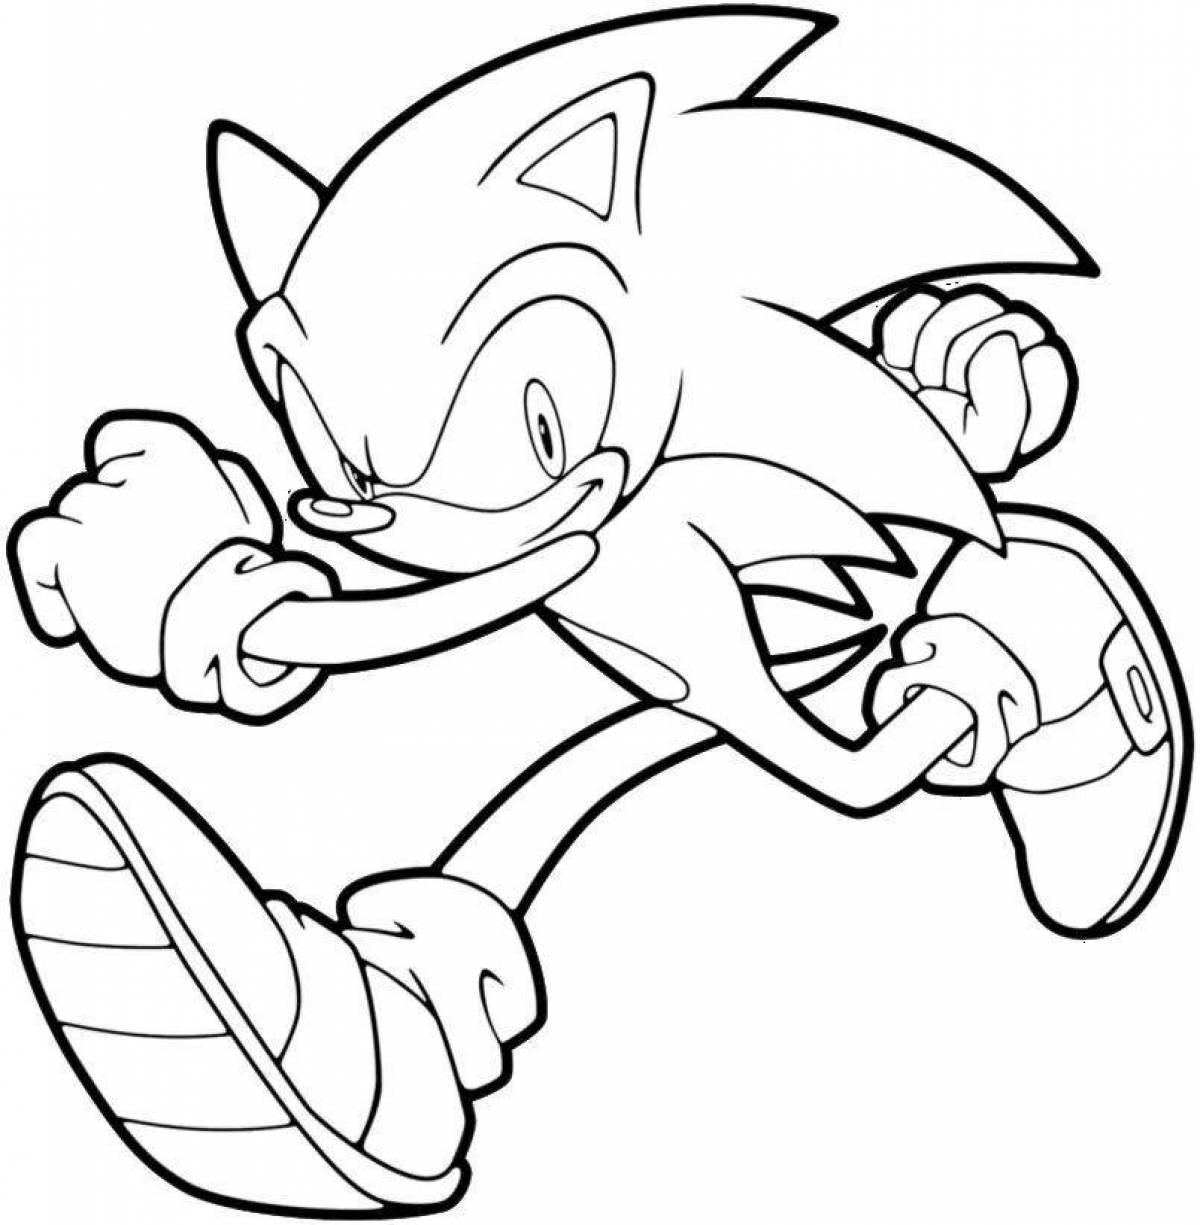 Great super sonic coloring book